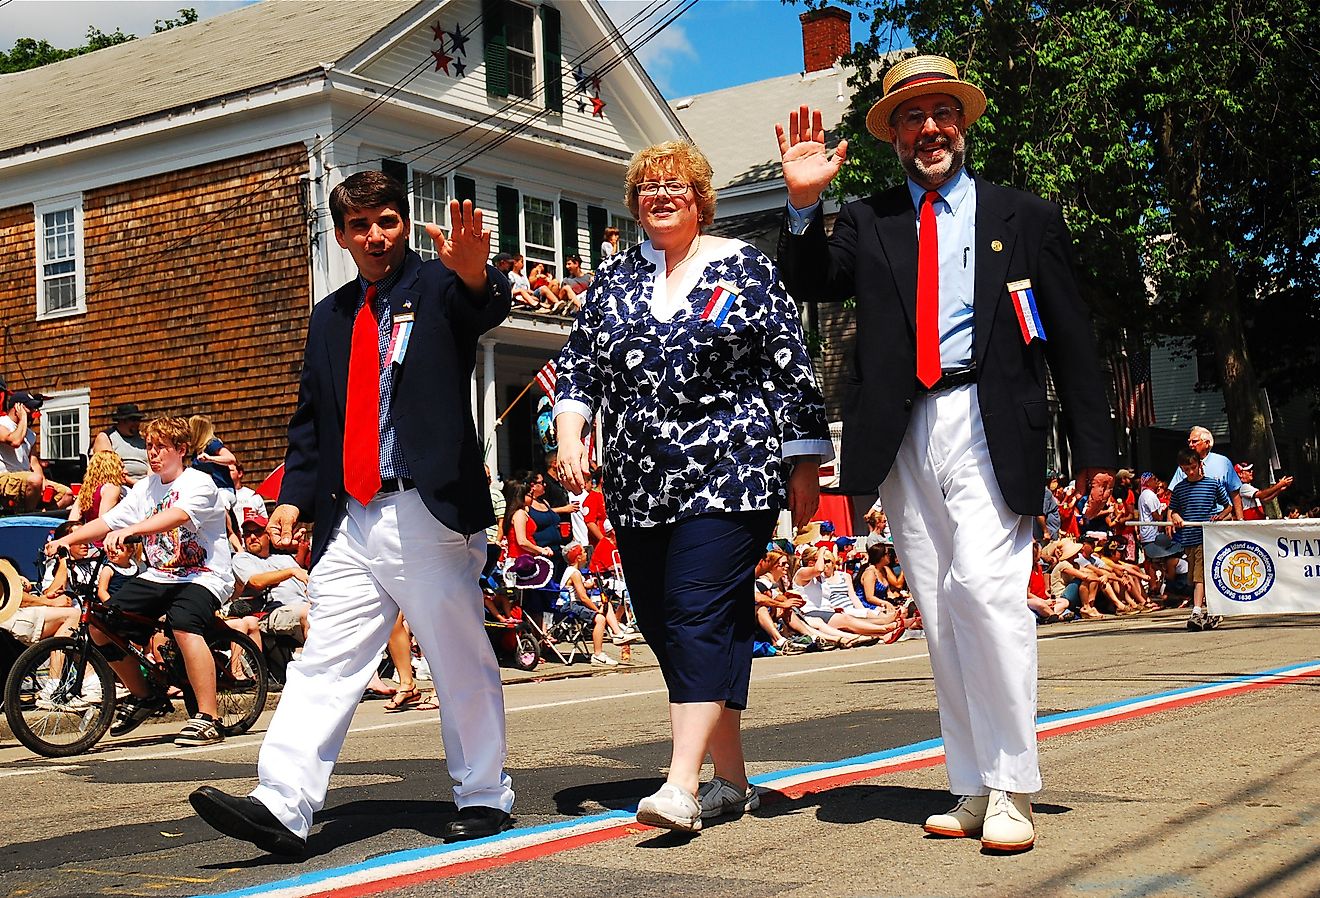 Town officials march in a Fourth of July parade in Bristol, Rhode Island. Image credit James Kirkikis via Shutterstock